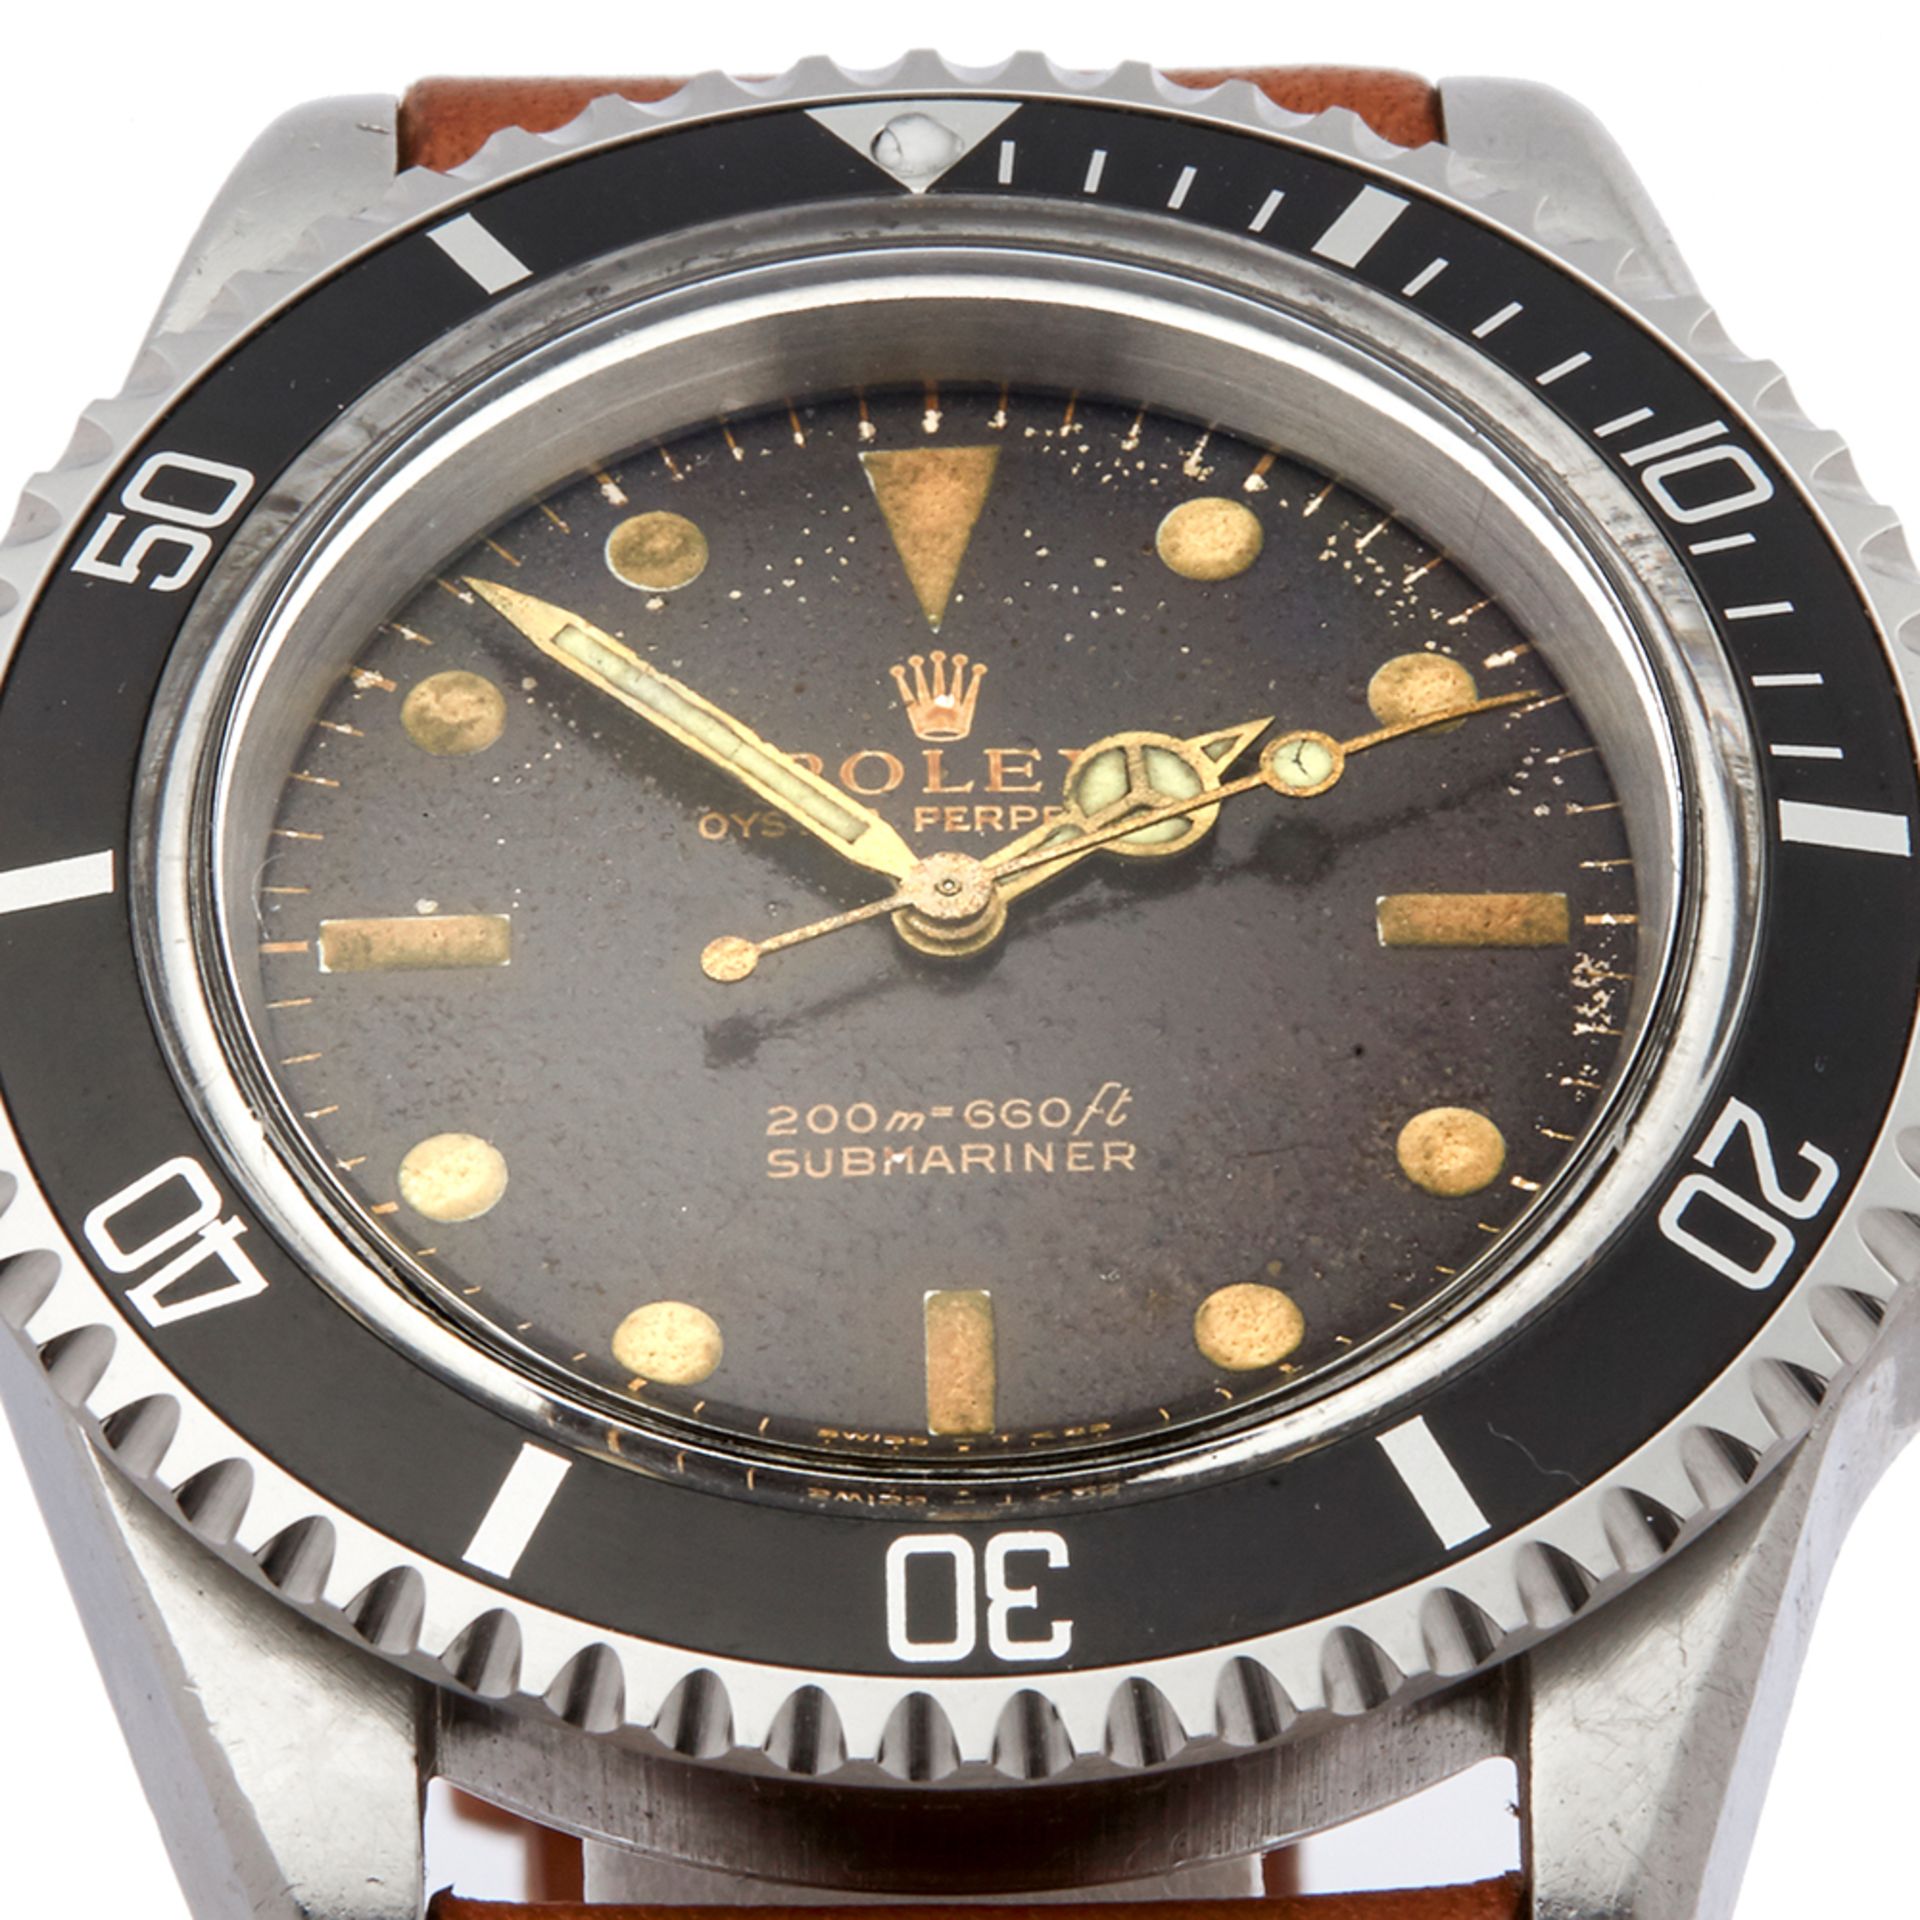 1964 Rolex Submariner Non Date Tropical Dial Stainless Steel - 5513 - Image 10 of 10